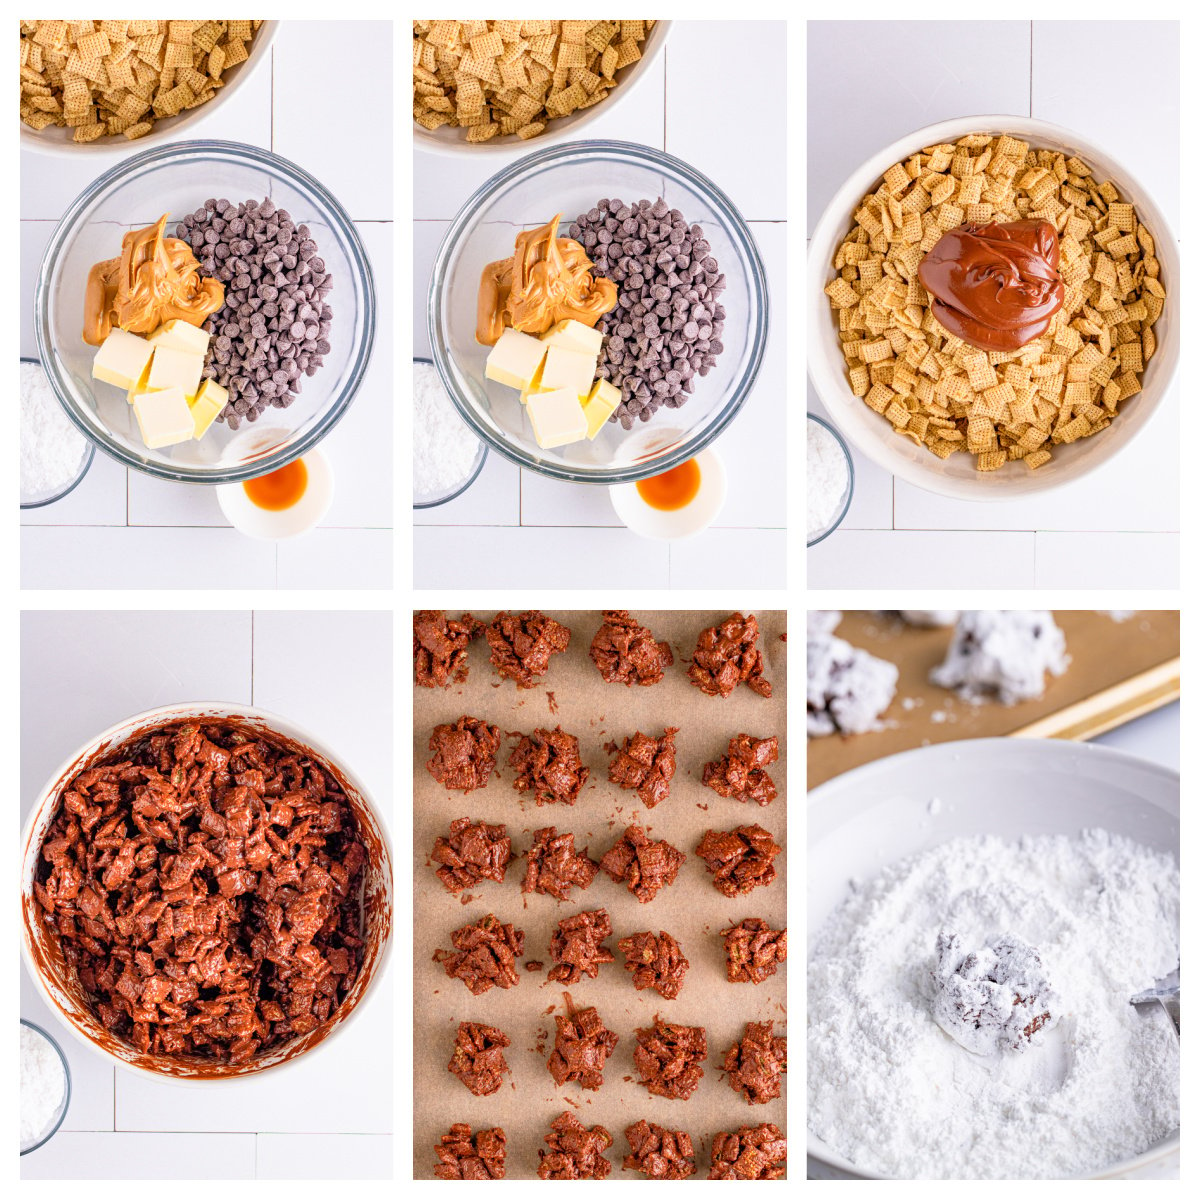 Step by step photos on how to make Muddy Buddy Cookies.